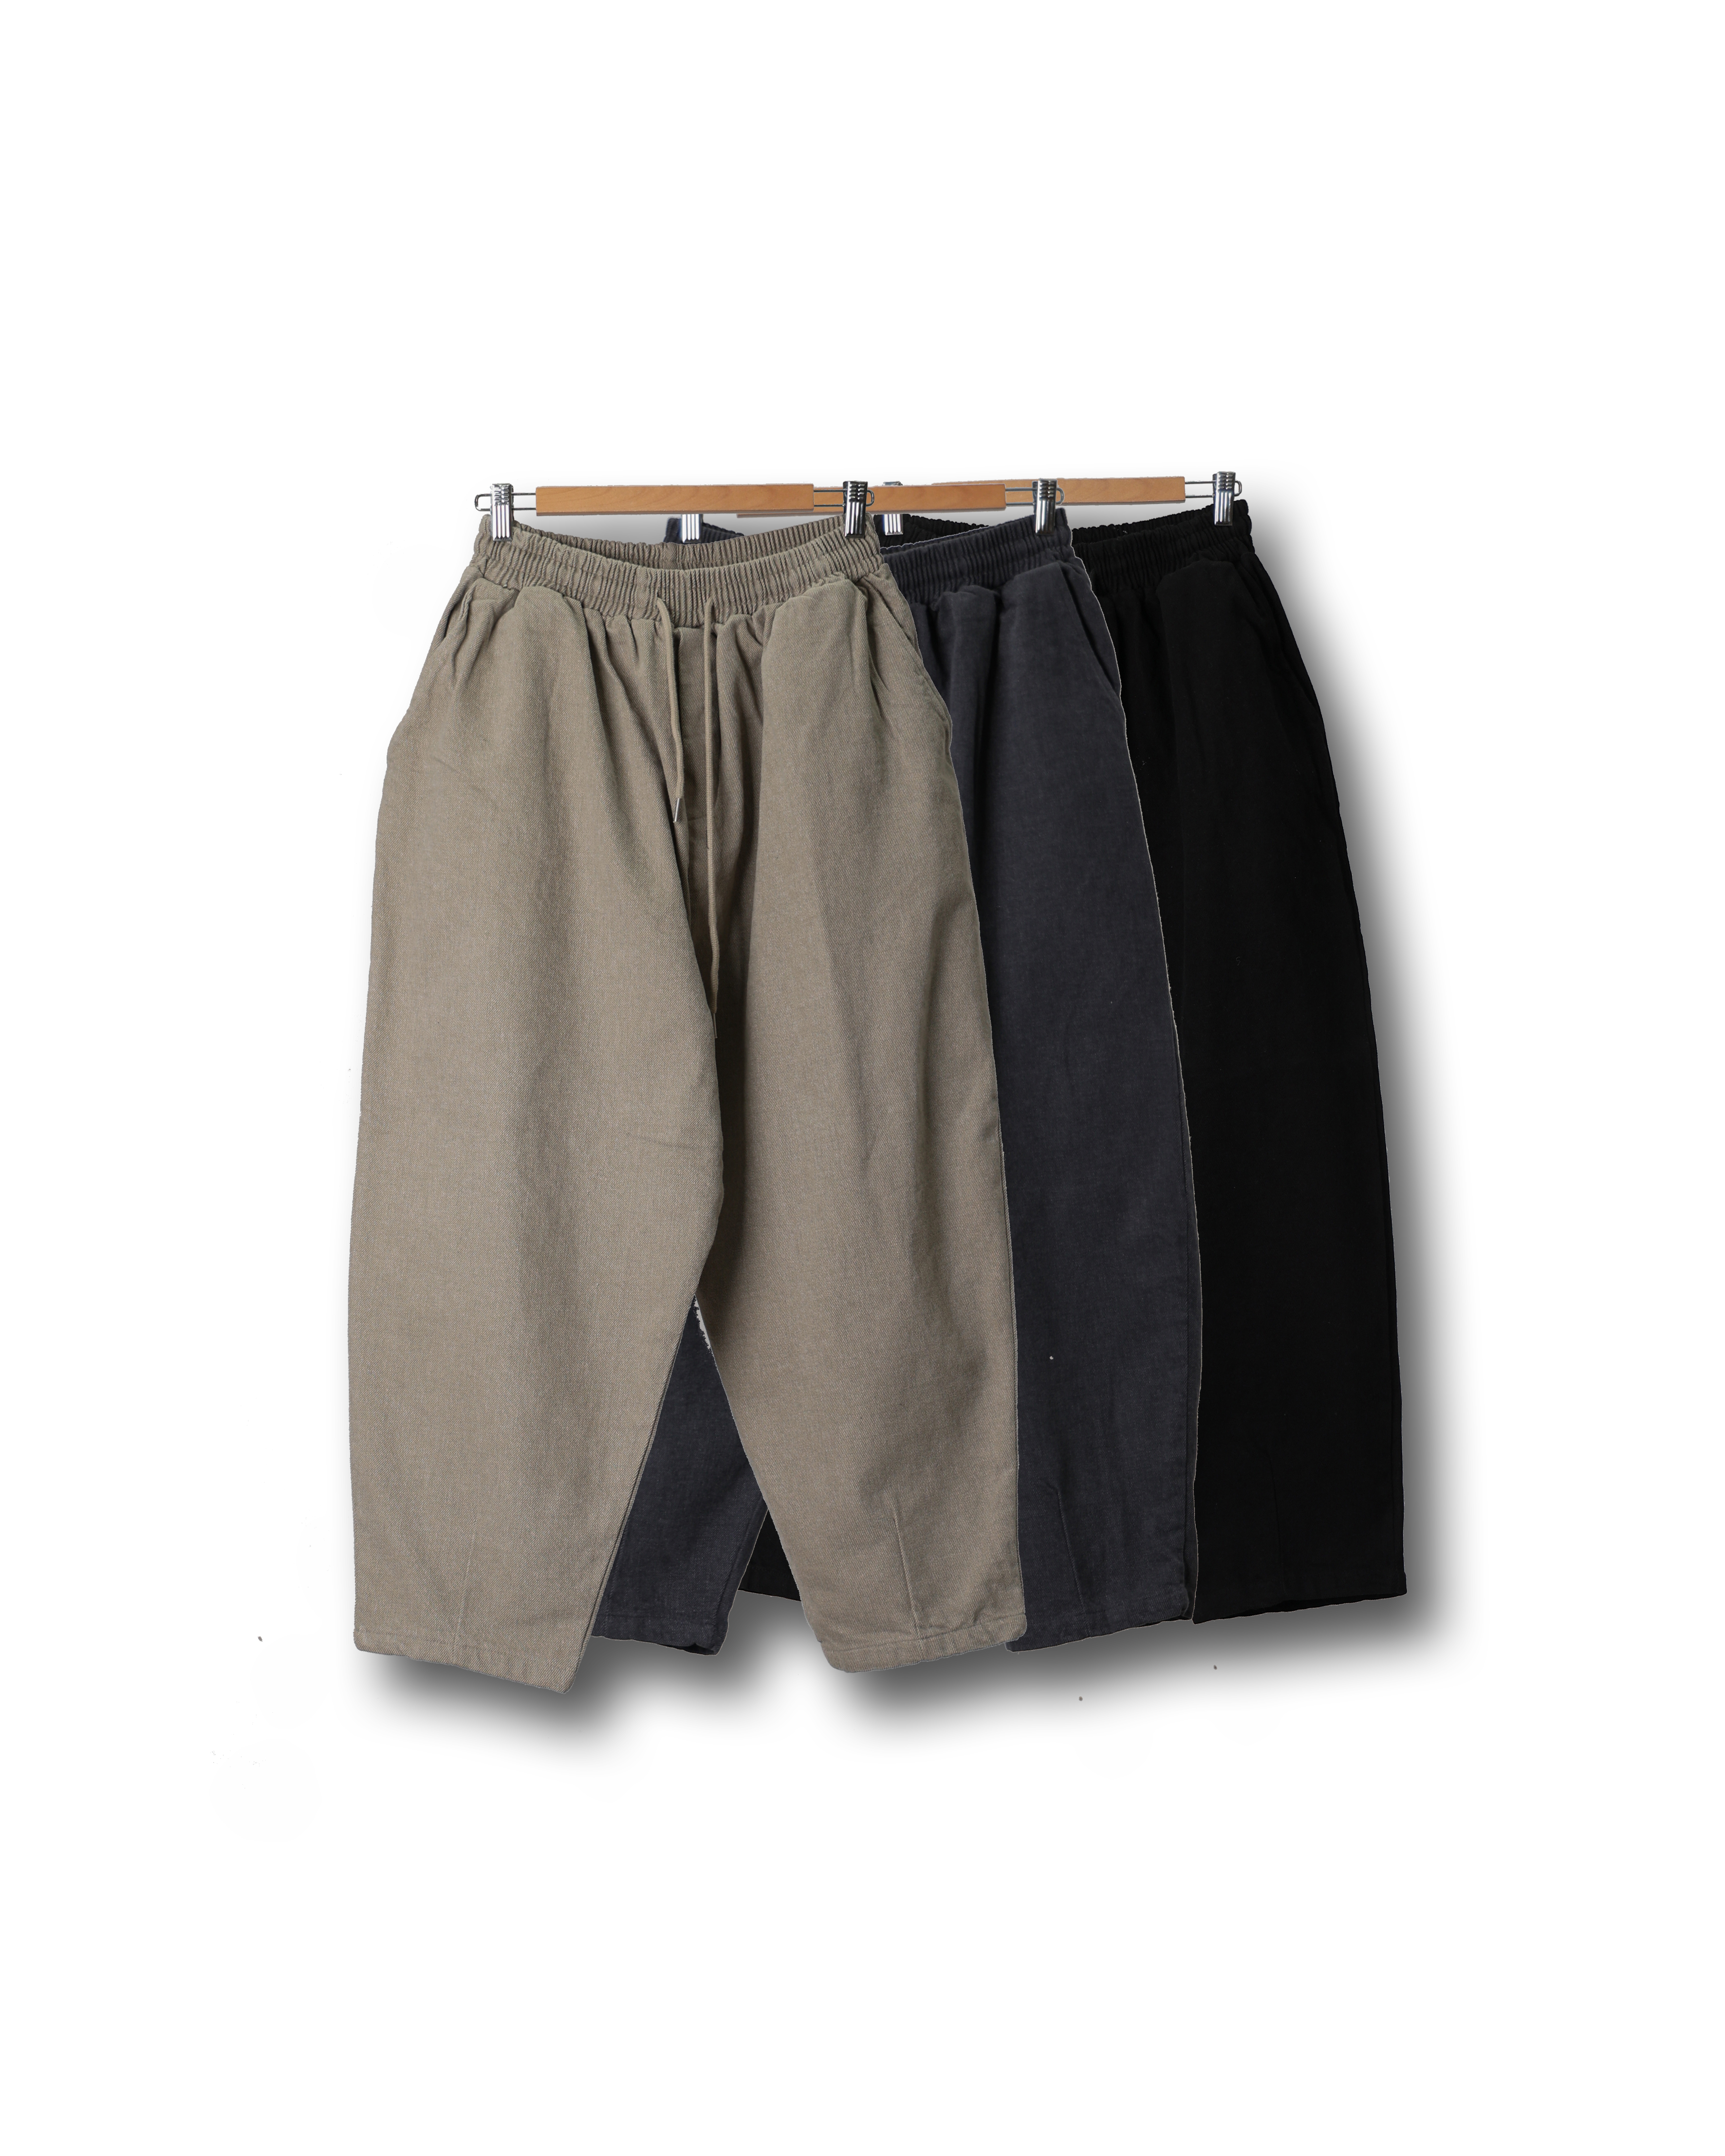 RAM FORE Peach Napped Balloon Pants (Black/Charcoal/Beige)